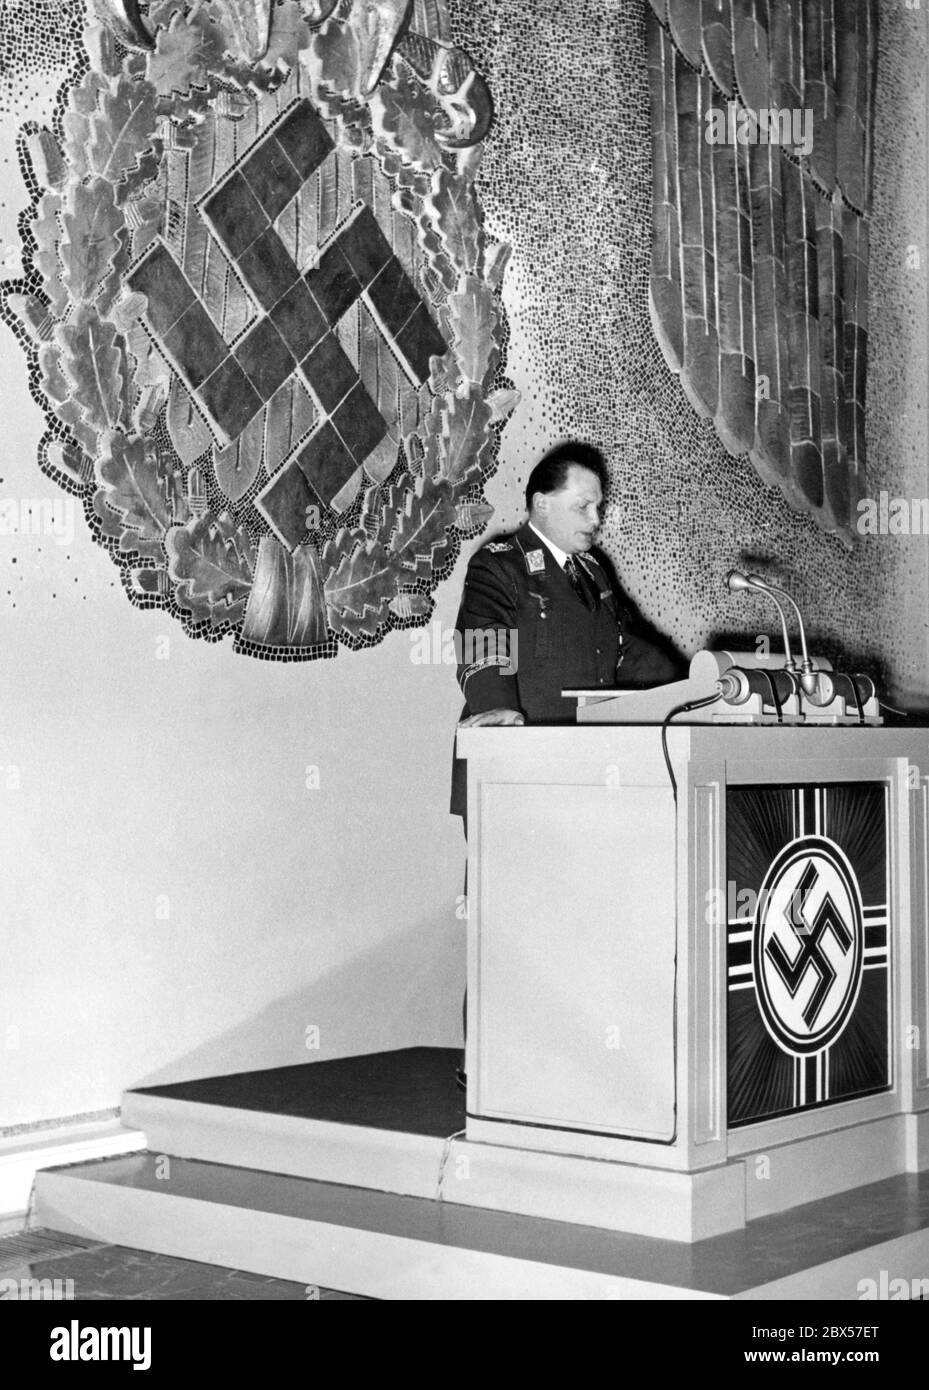 Hermann Goering, in Luftwaffe uniform, gives a speech at the opening ceremony of the Deutschen Akademie der Luftfahrtforschung (German Academy of Aeronautical Research), where he served as president, at the Reichsluftfahrtministerium (German Ministry of Aviation). On the wall behind him, in typical pompous style, there is a tiled swastika in the claws of the Imperial Eagle. Stock Photo